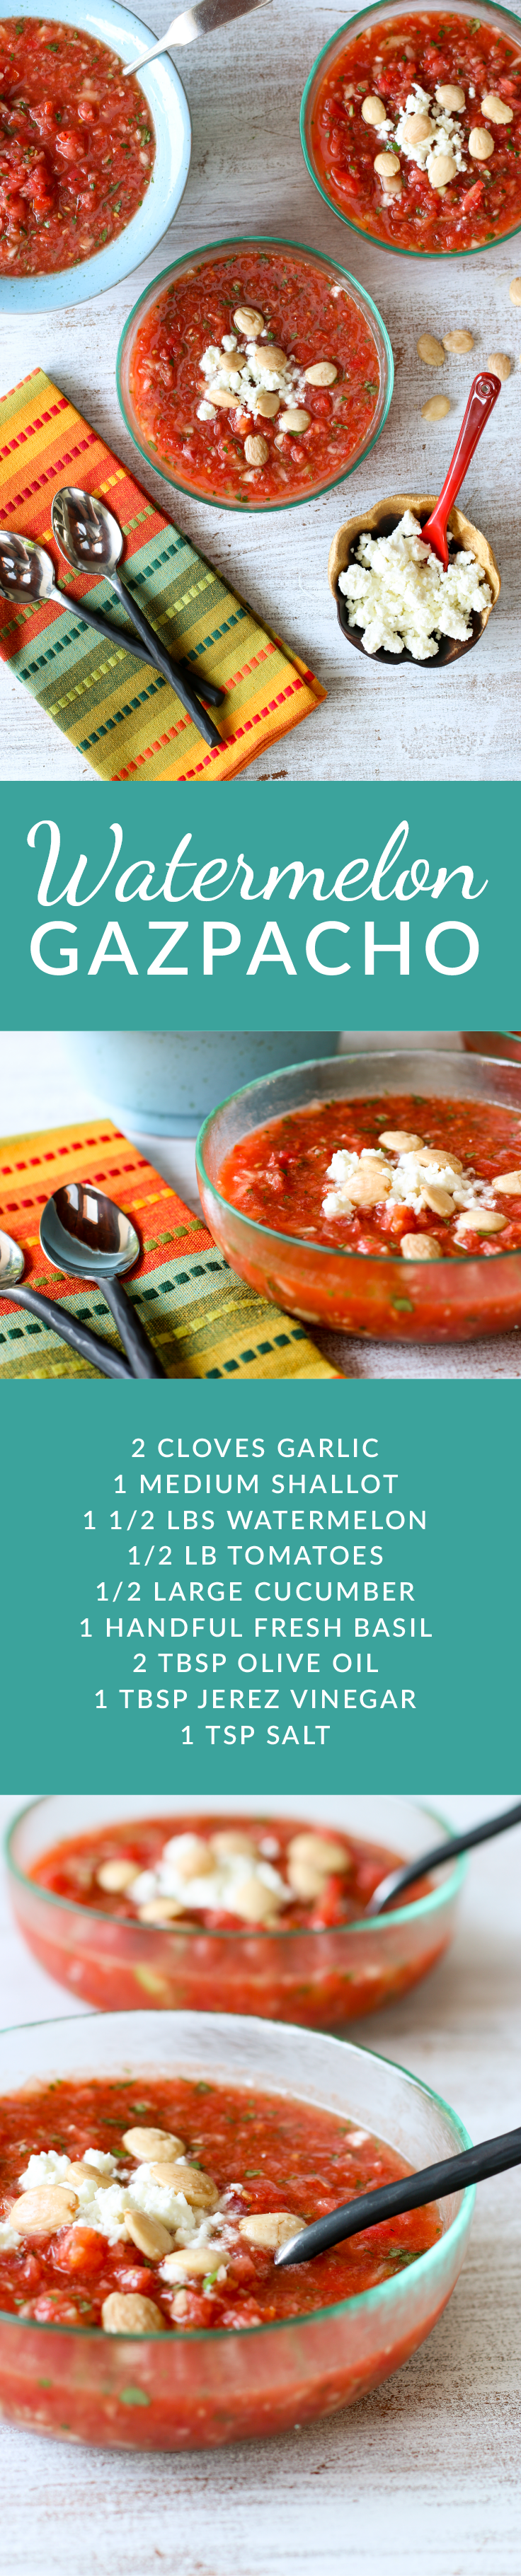 This easy-to-make watermelon and tomato gazpacho is perfect summer dish to get you through the heat, minimize your cooking efforts and feed you for a week. Watermelon gives this gazpacho and extra flavor burst and a little sweetness.